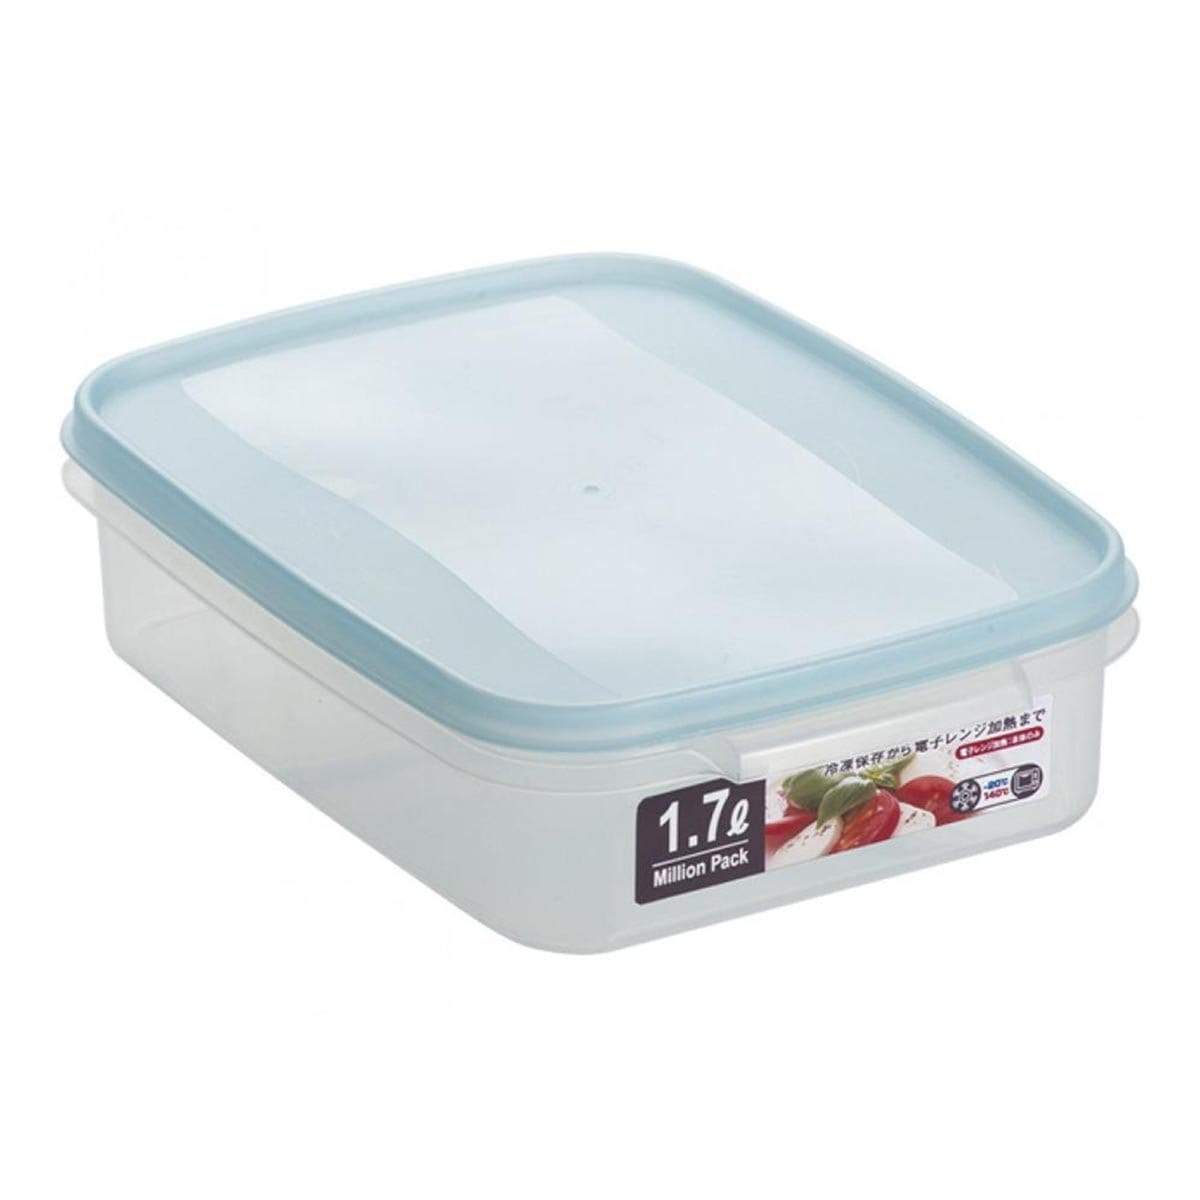 Japanese Plastic Food Storage Container 1700 ml Bue